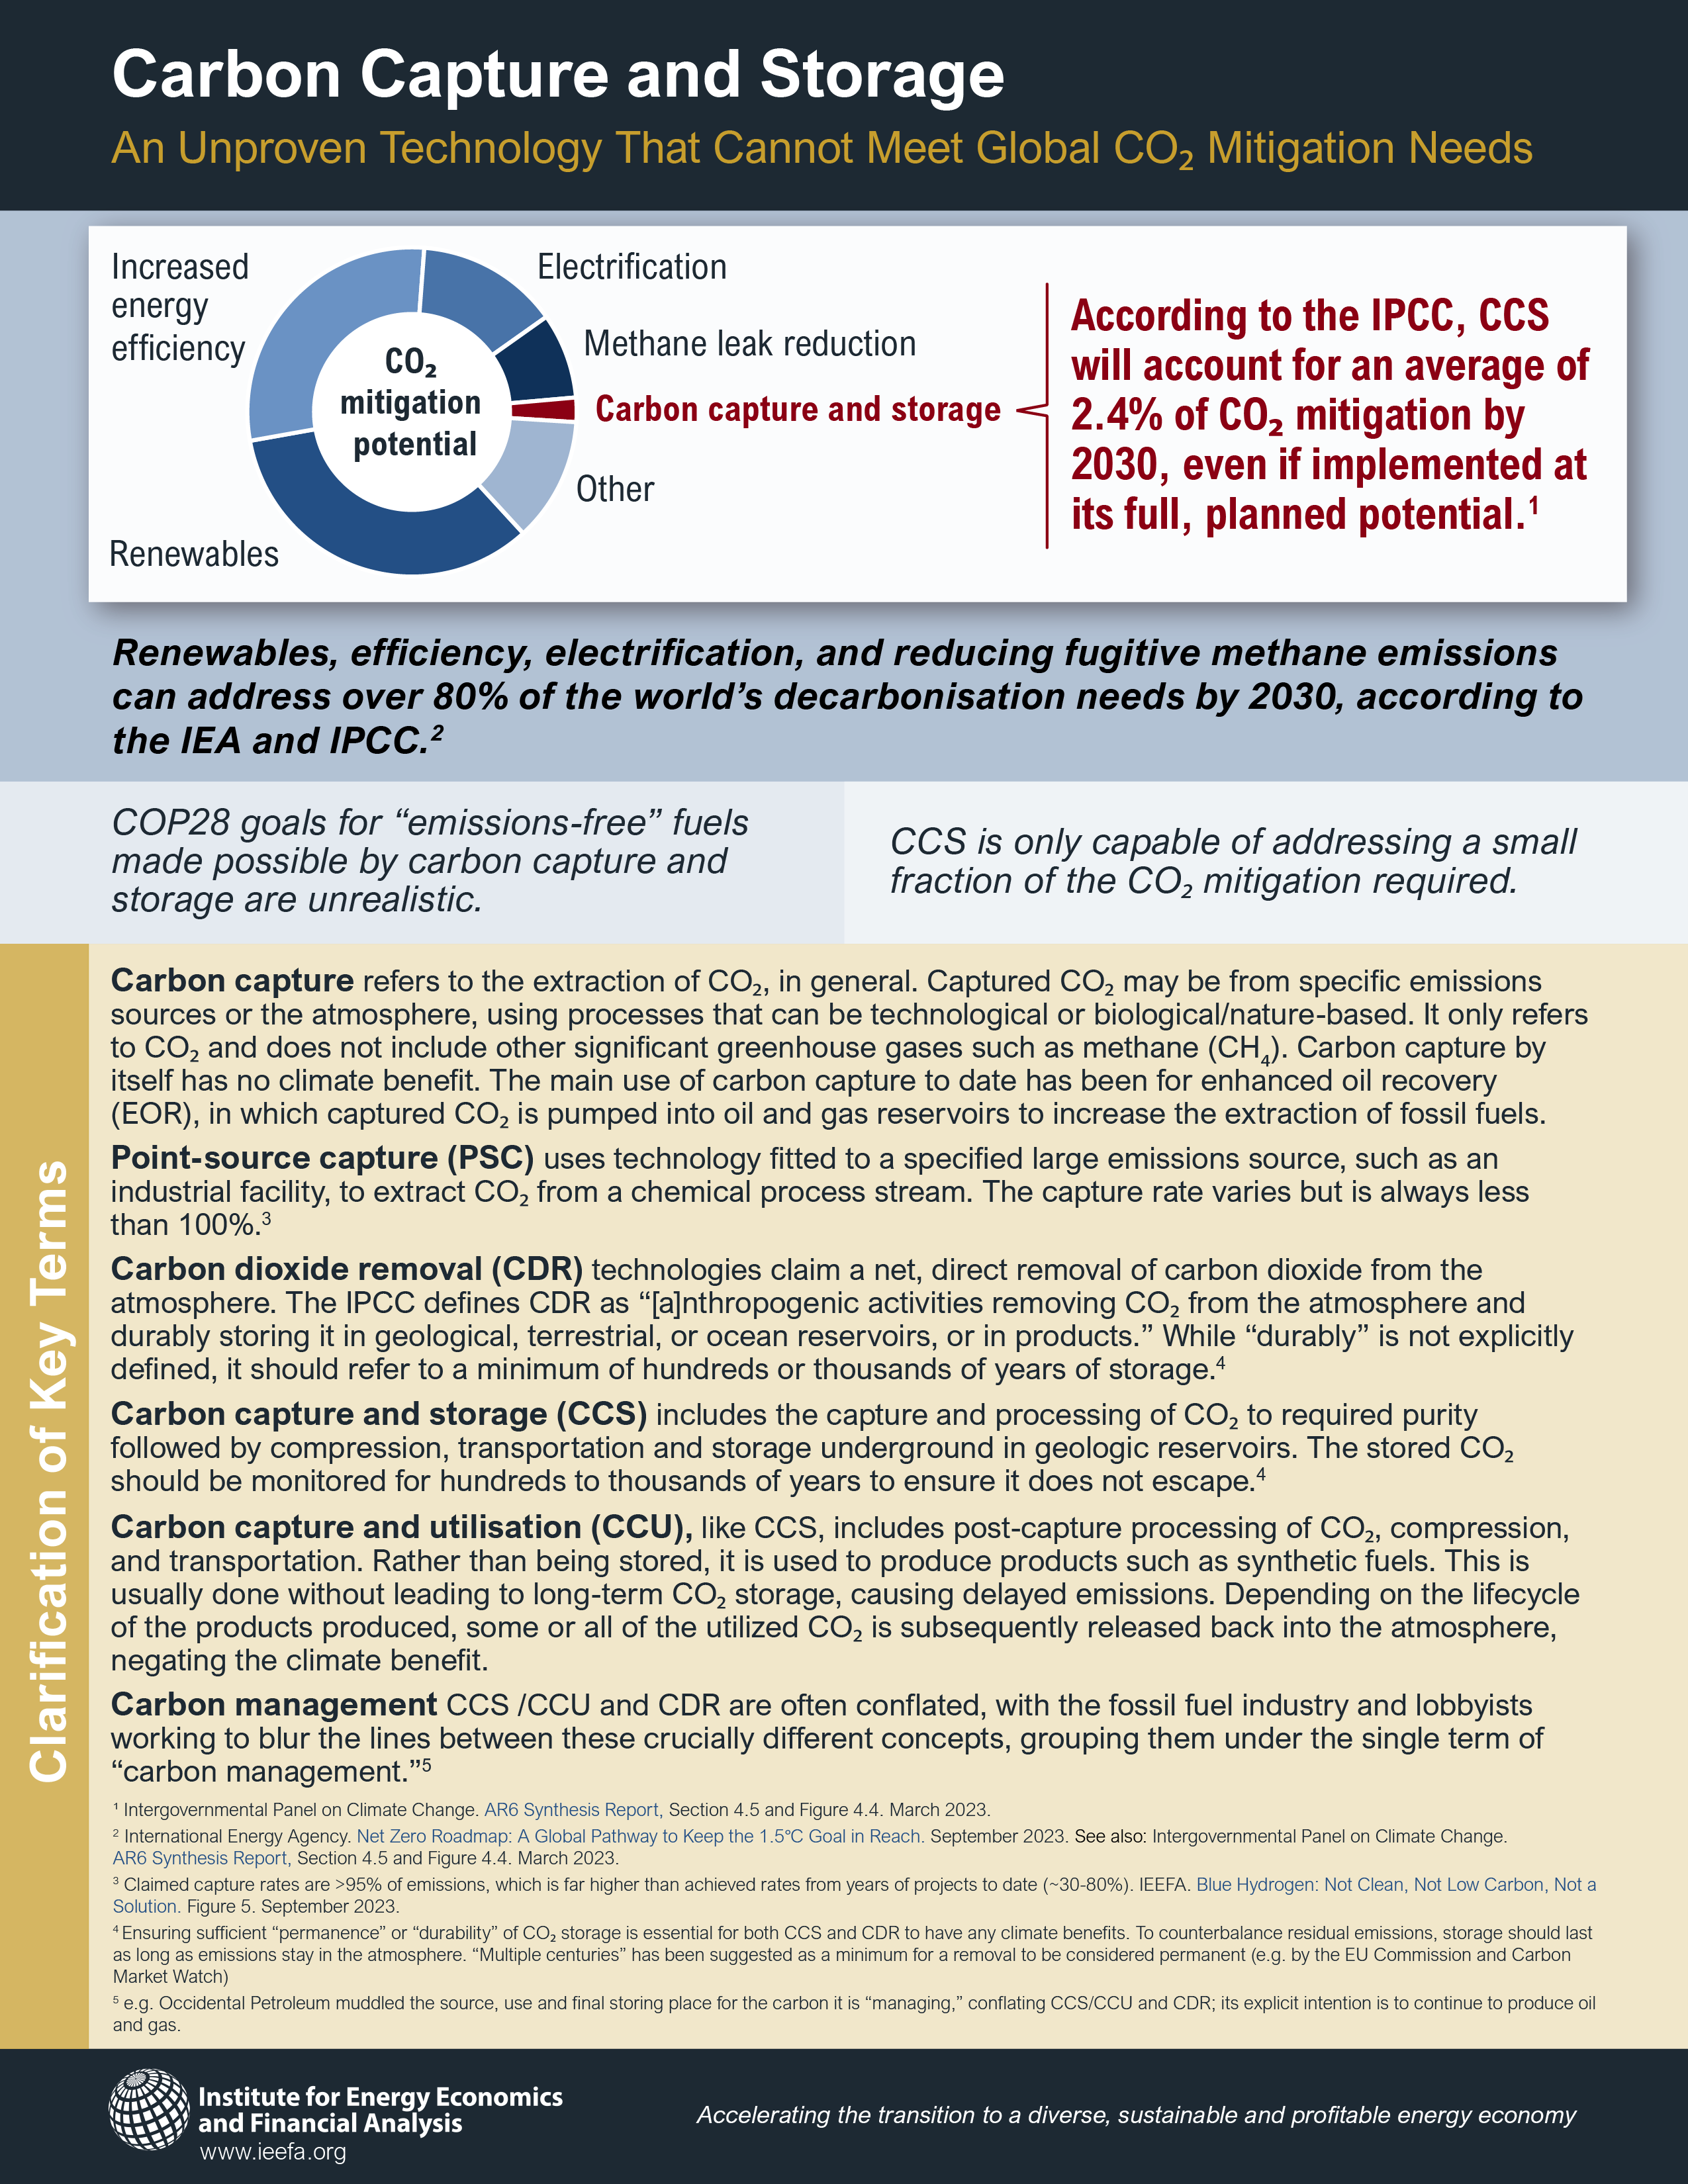 CCS fact sheet, full text available in PDF download at top of page